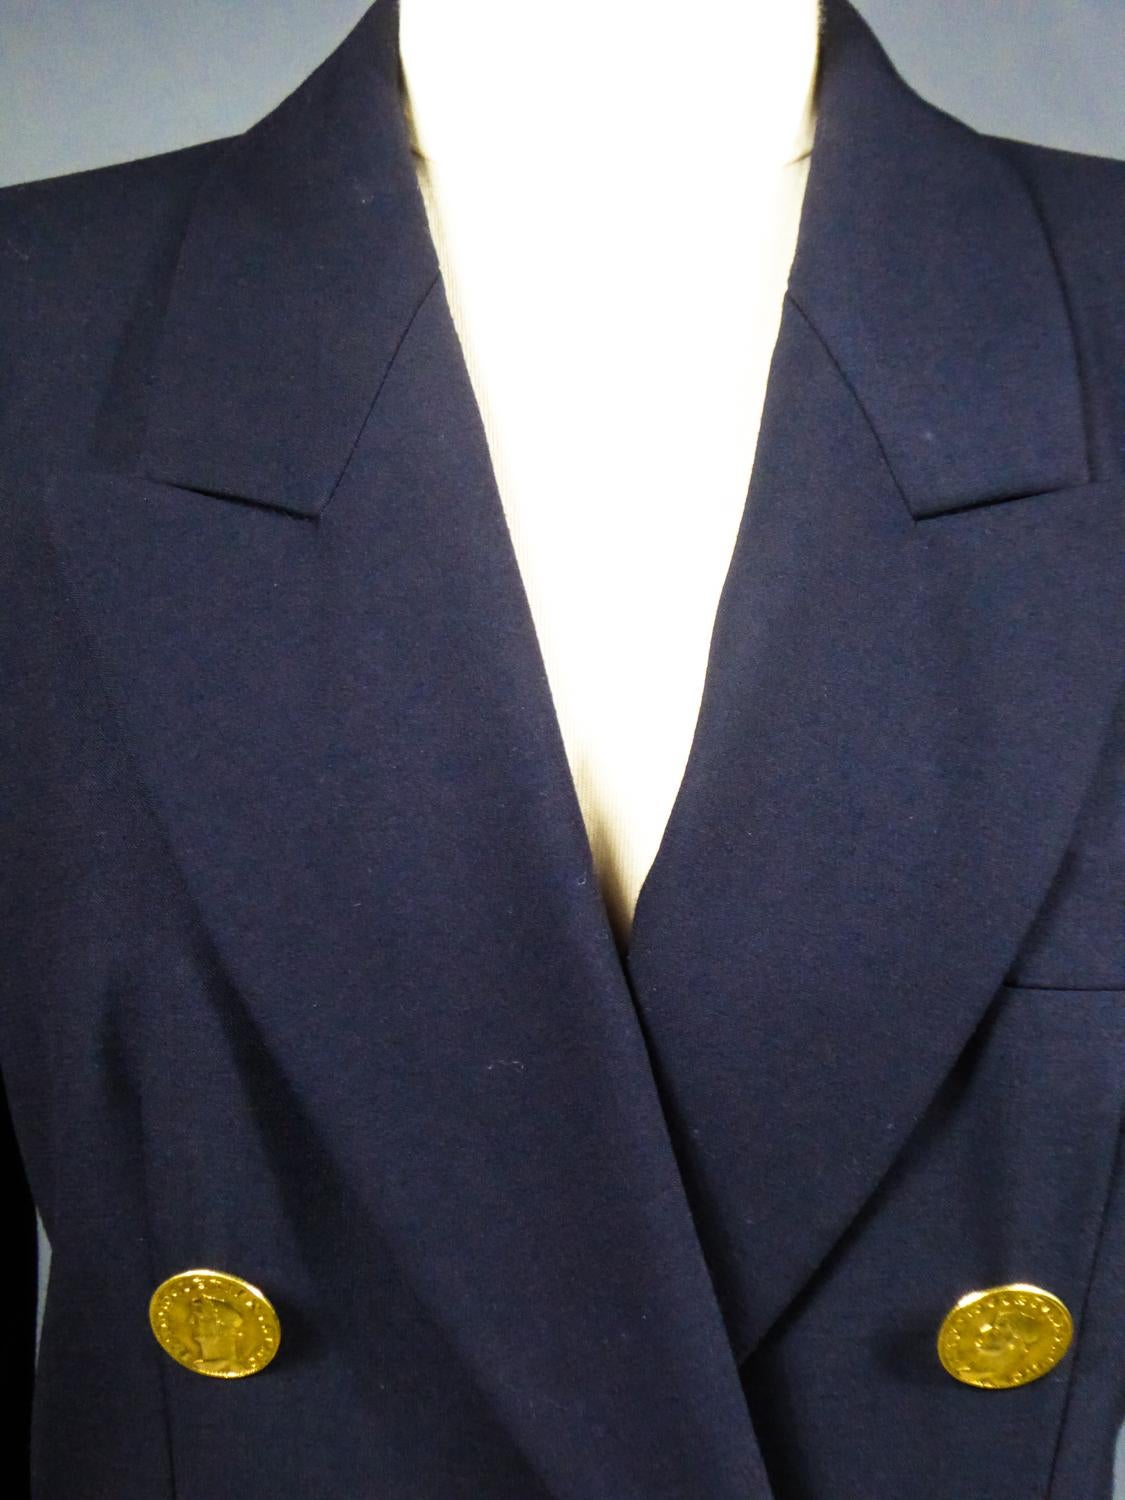 Yves Saint Laurent Rive Gauche Navy Jacket Circa 1990 In Good Condition For Sale In Toulon, FR